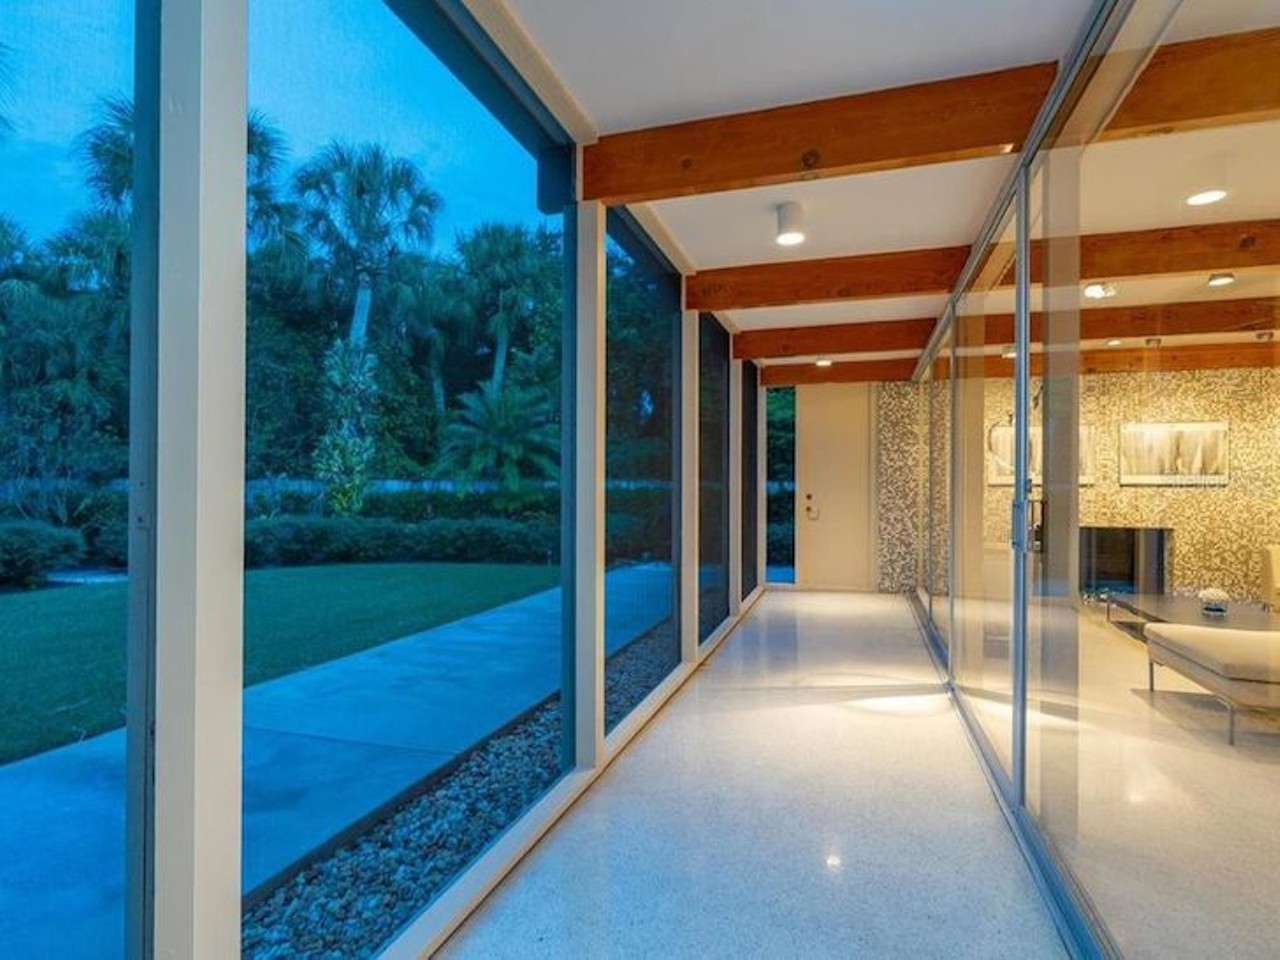 A Florida mid-century modern home designed by architect Mary Hook is now for sale